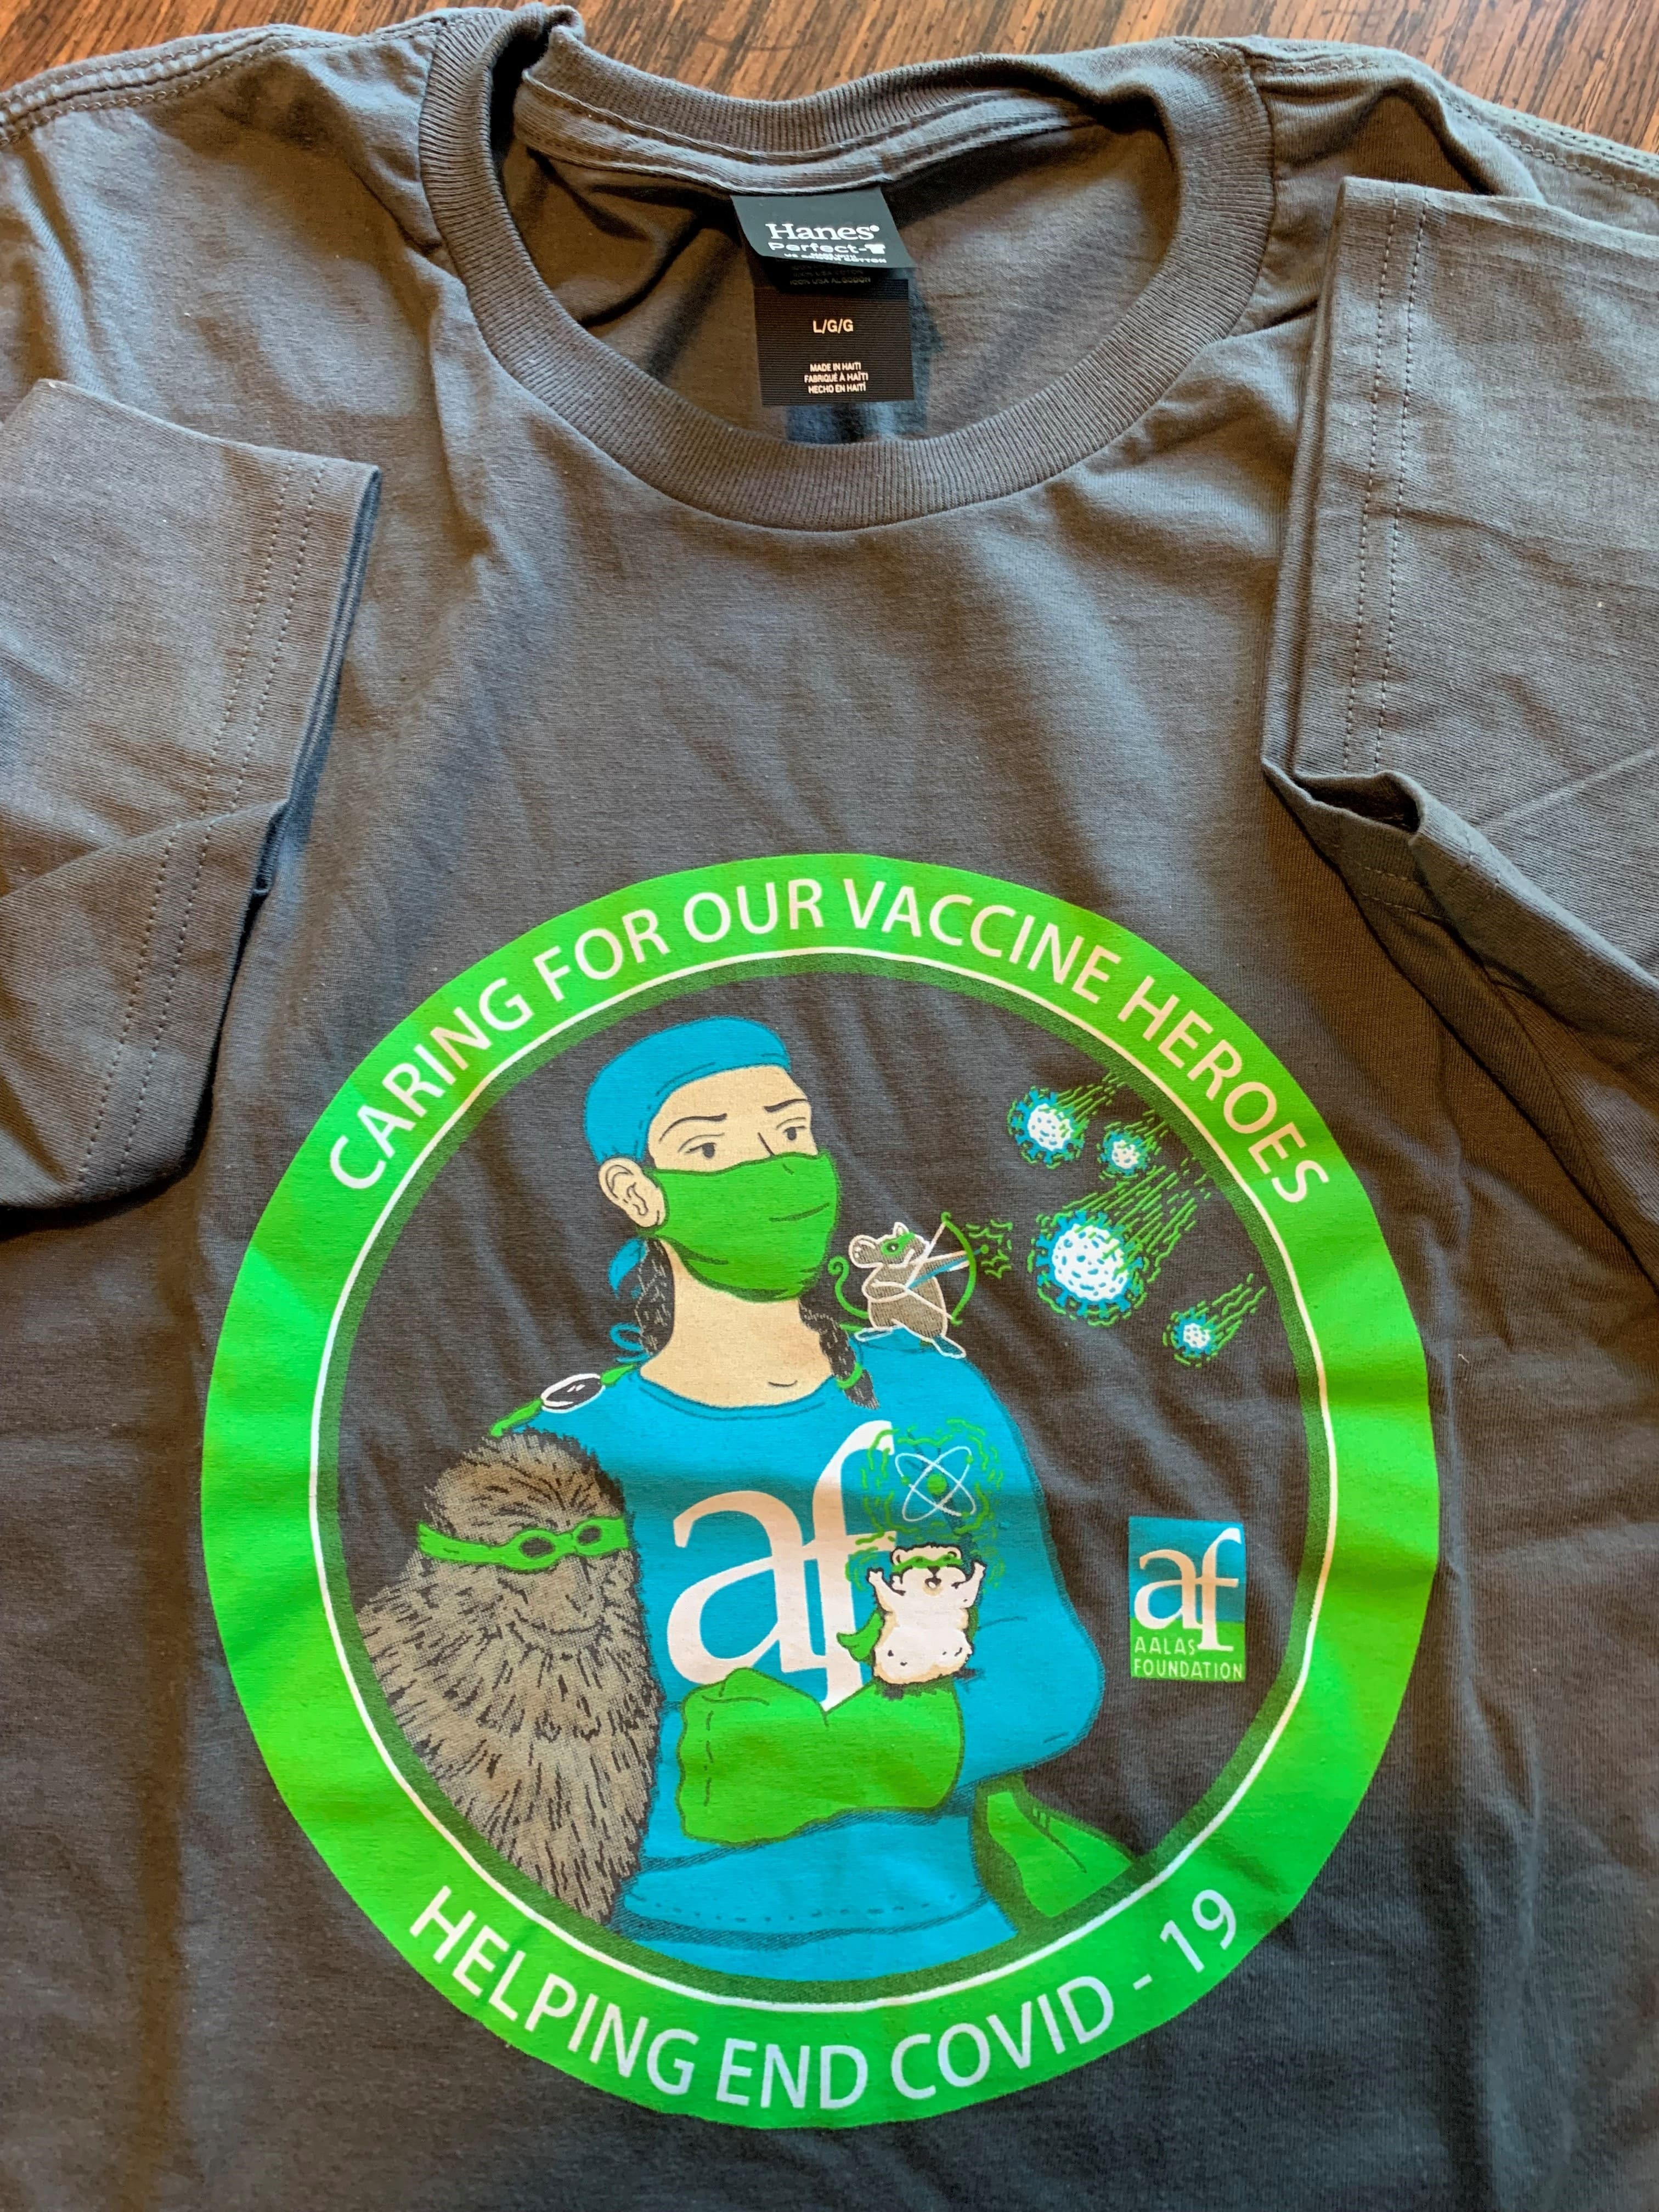 AALAS Foundation "Caring for Vaccine Heroes" t-shirt. Short Sleeve. Size Large